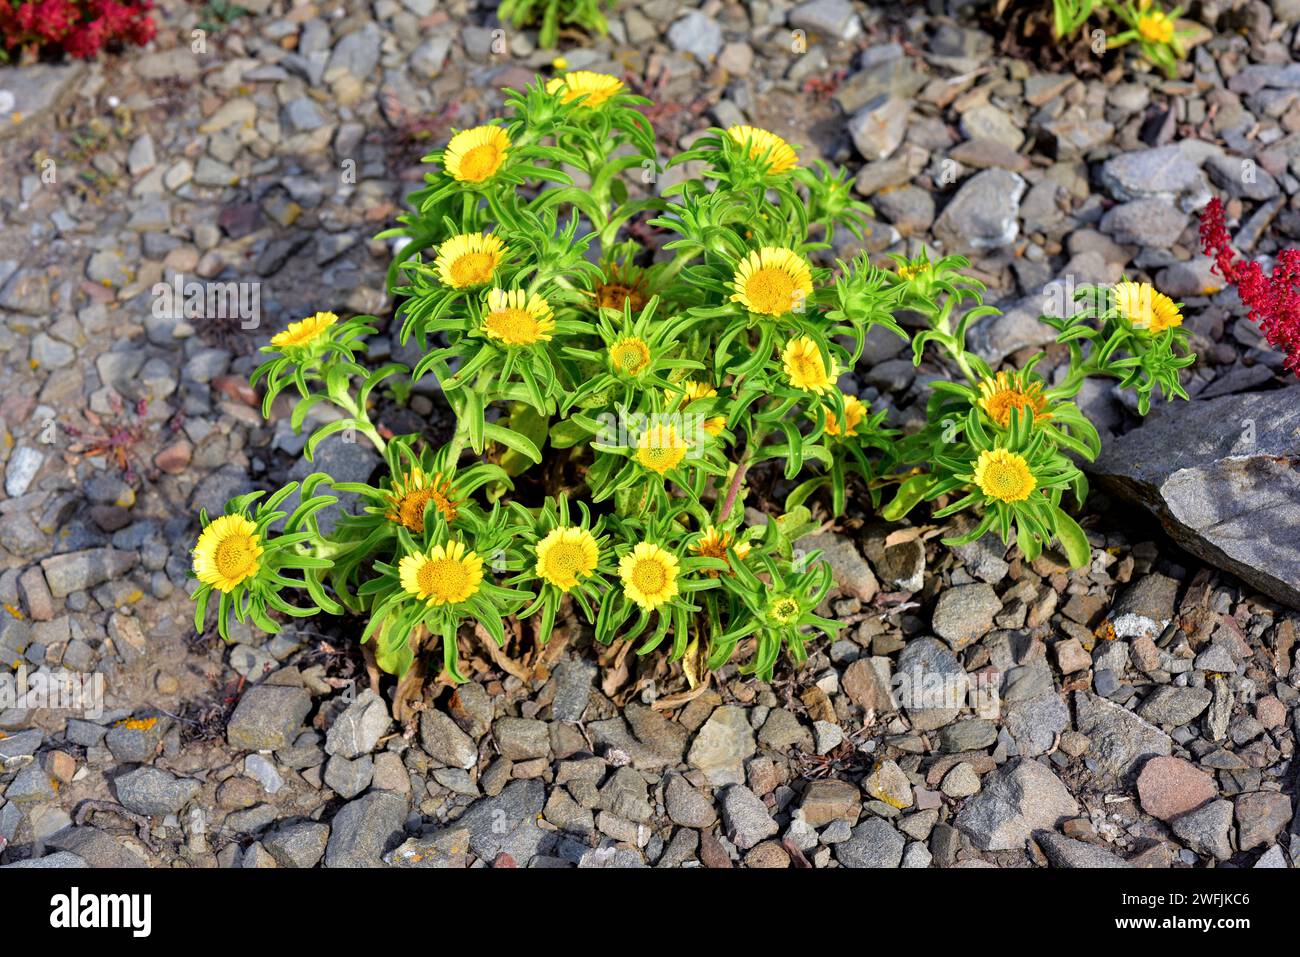 Gold coin daisy (Asteriscus maritimus or Pallenis maritima) is a perennial herb native to west Mediterranean coasts, Canary Islands and Greece. This p Stock Photo